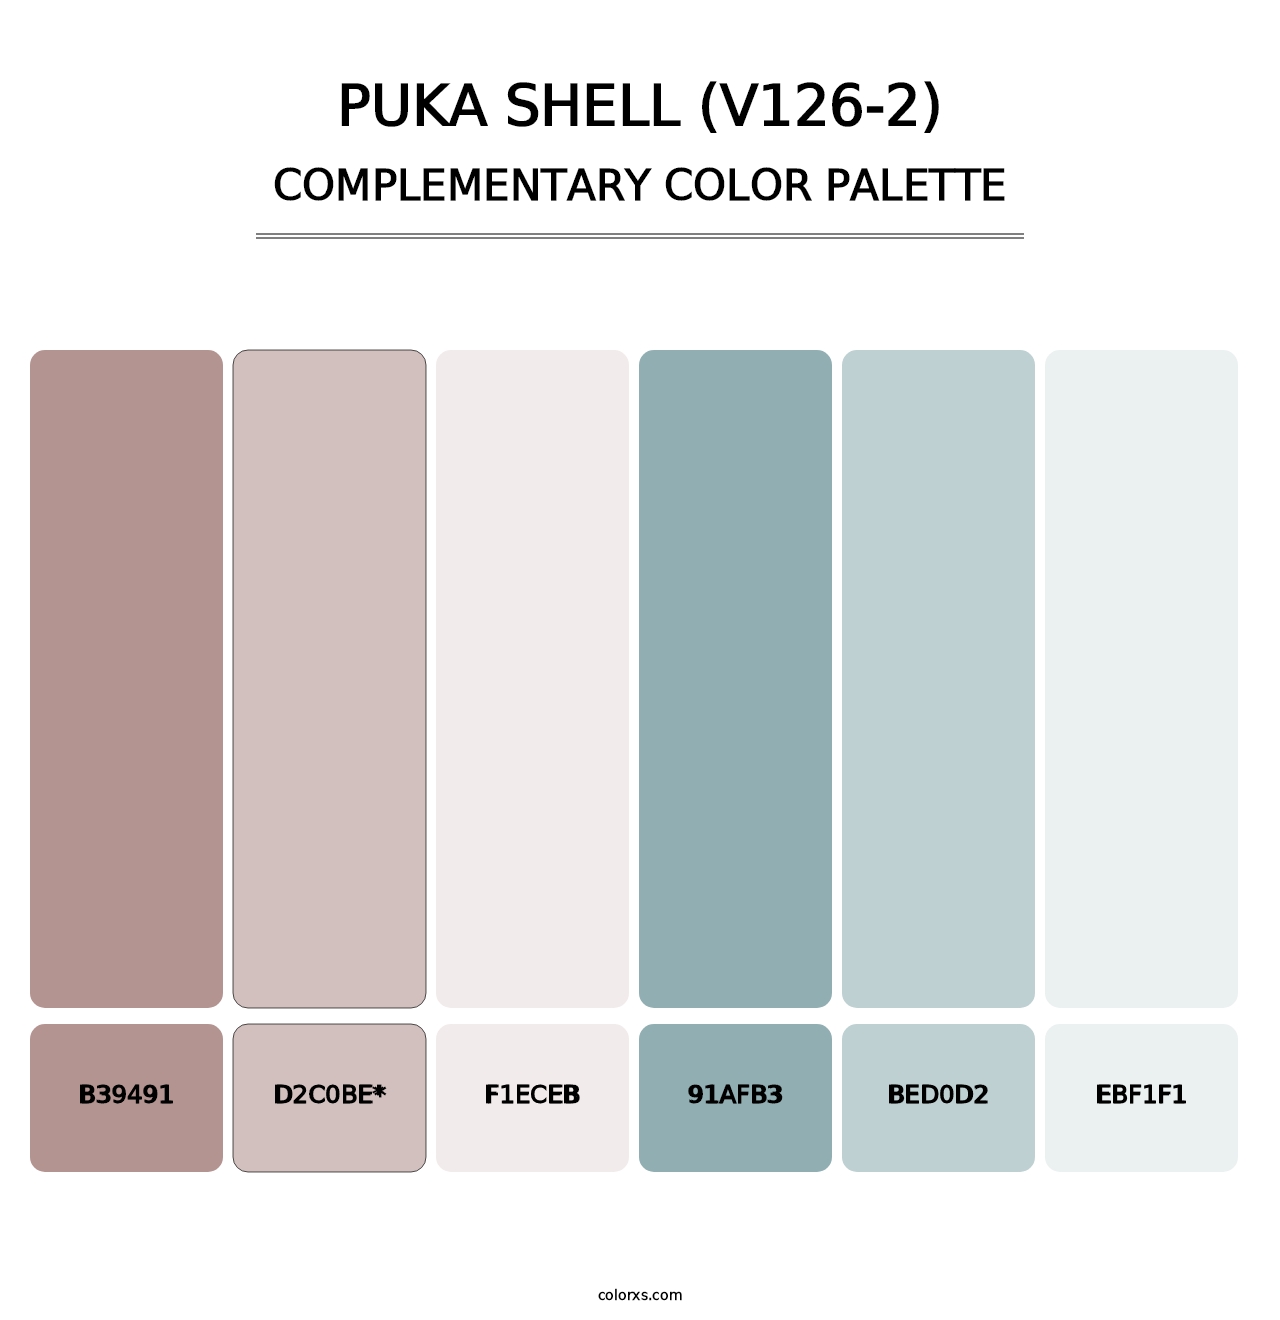 Puka Shell (V126-2) - Complementary Color Palette